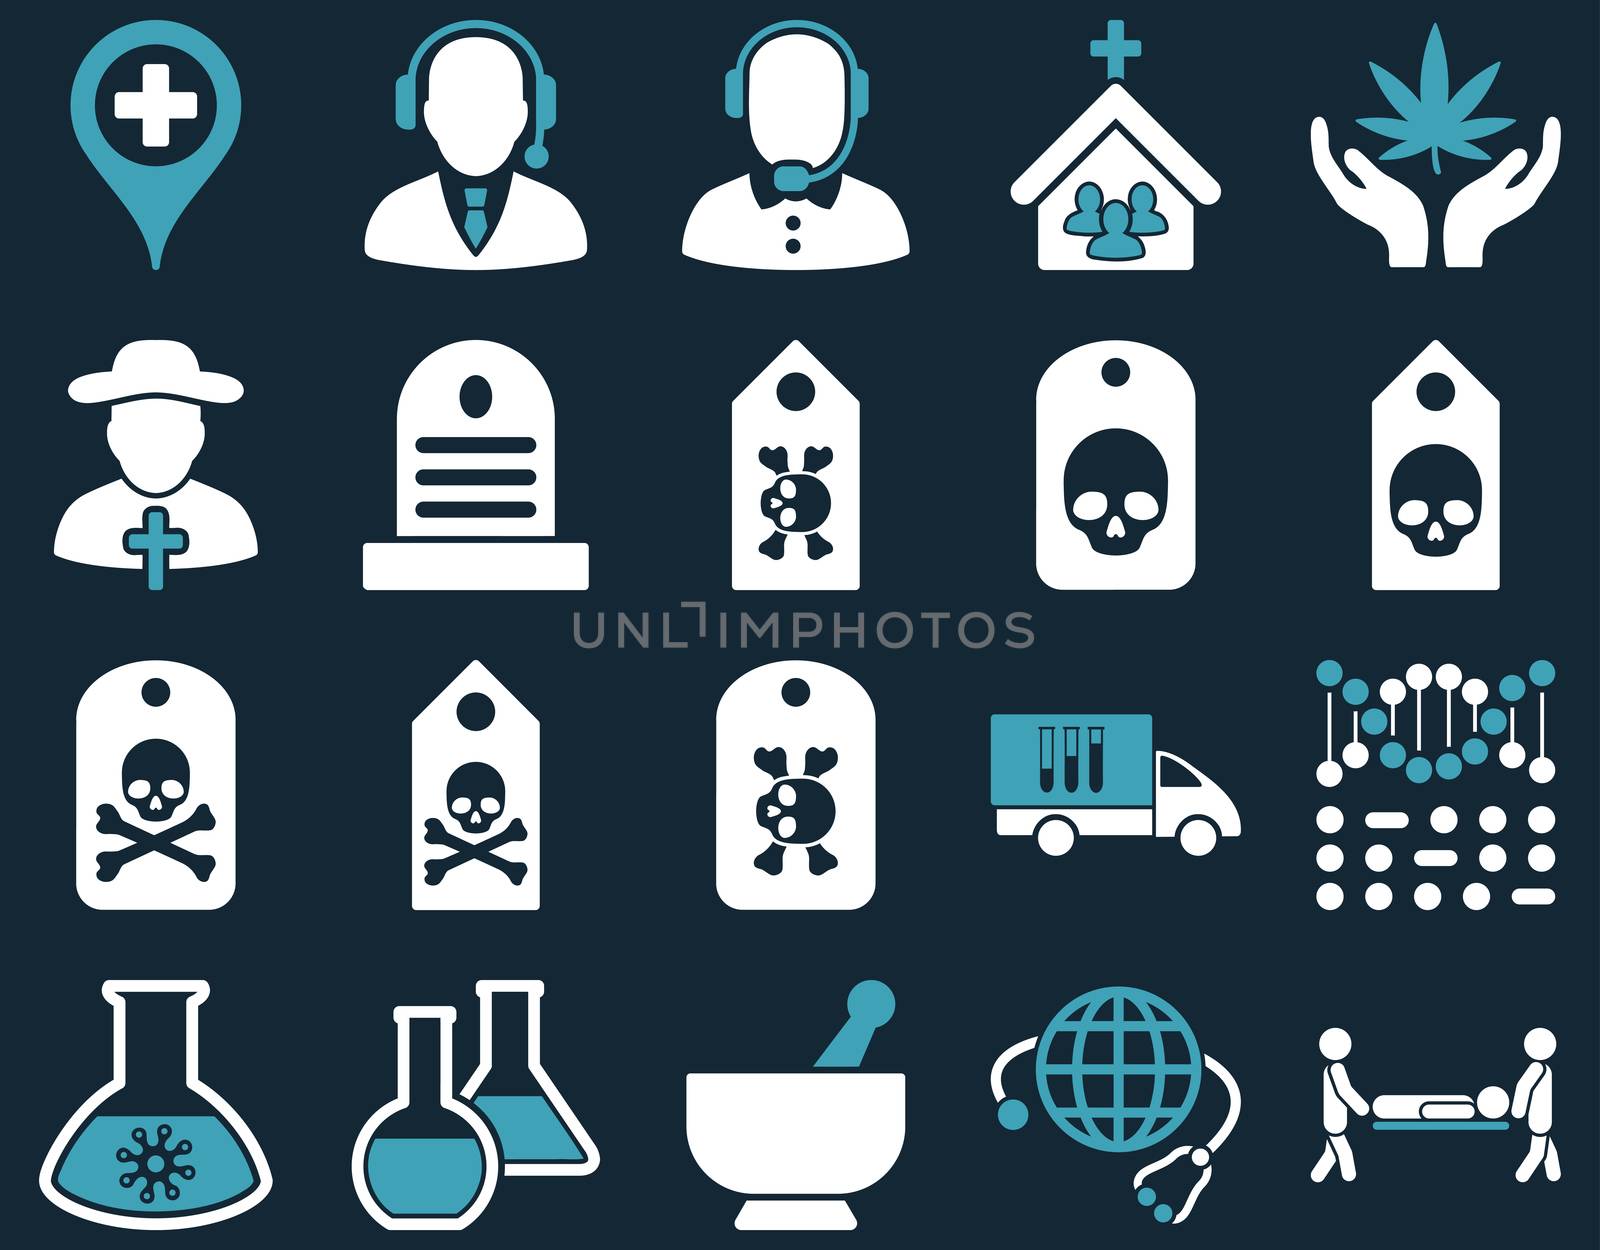 Medical icon set. Style: bicolor icons drawn with blue and white colors on a dark blue background.